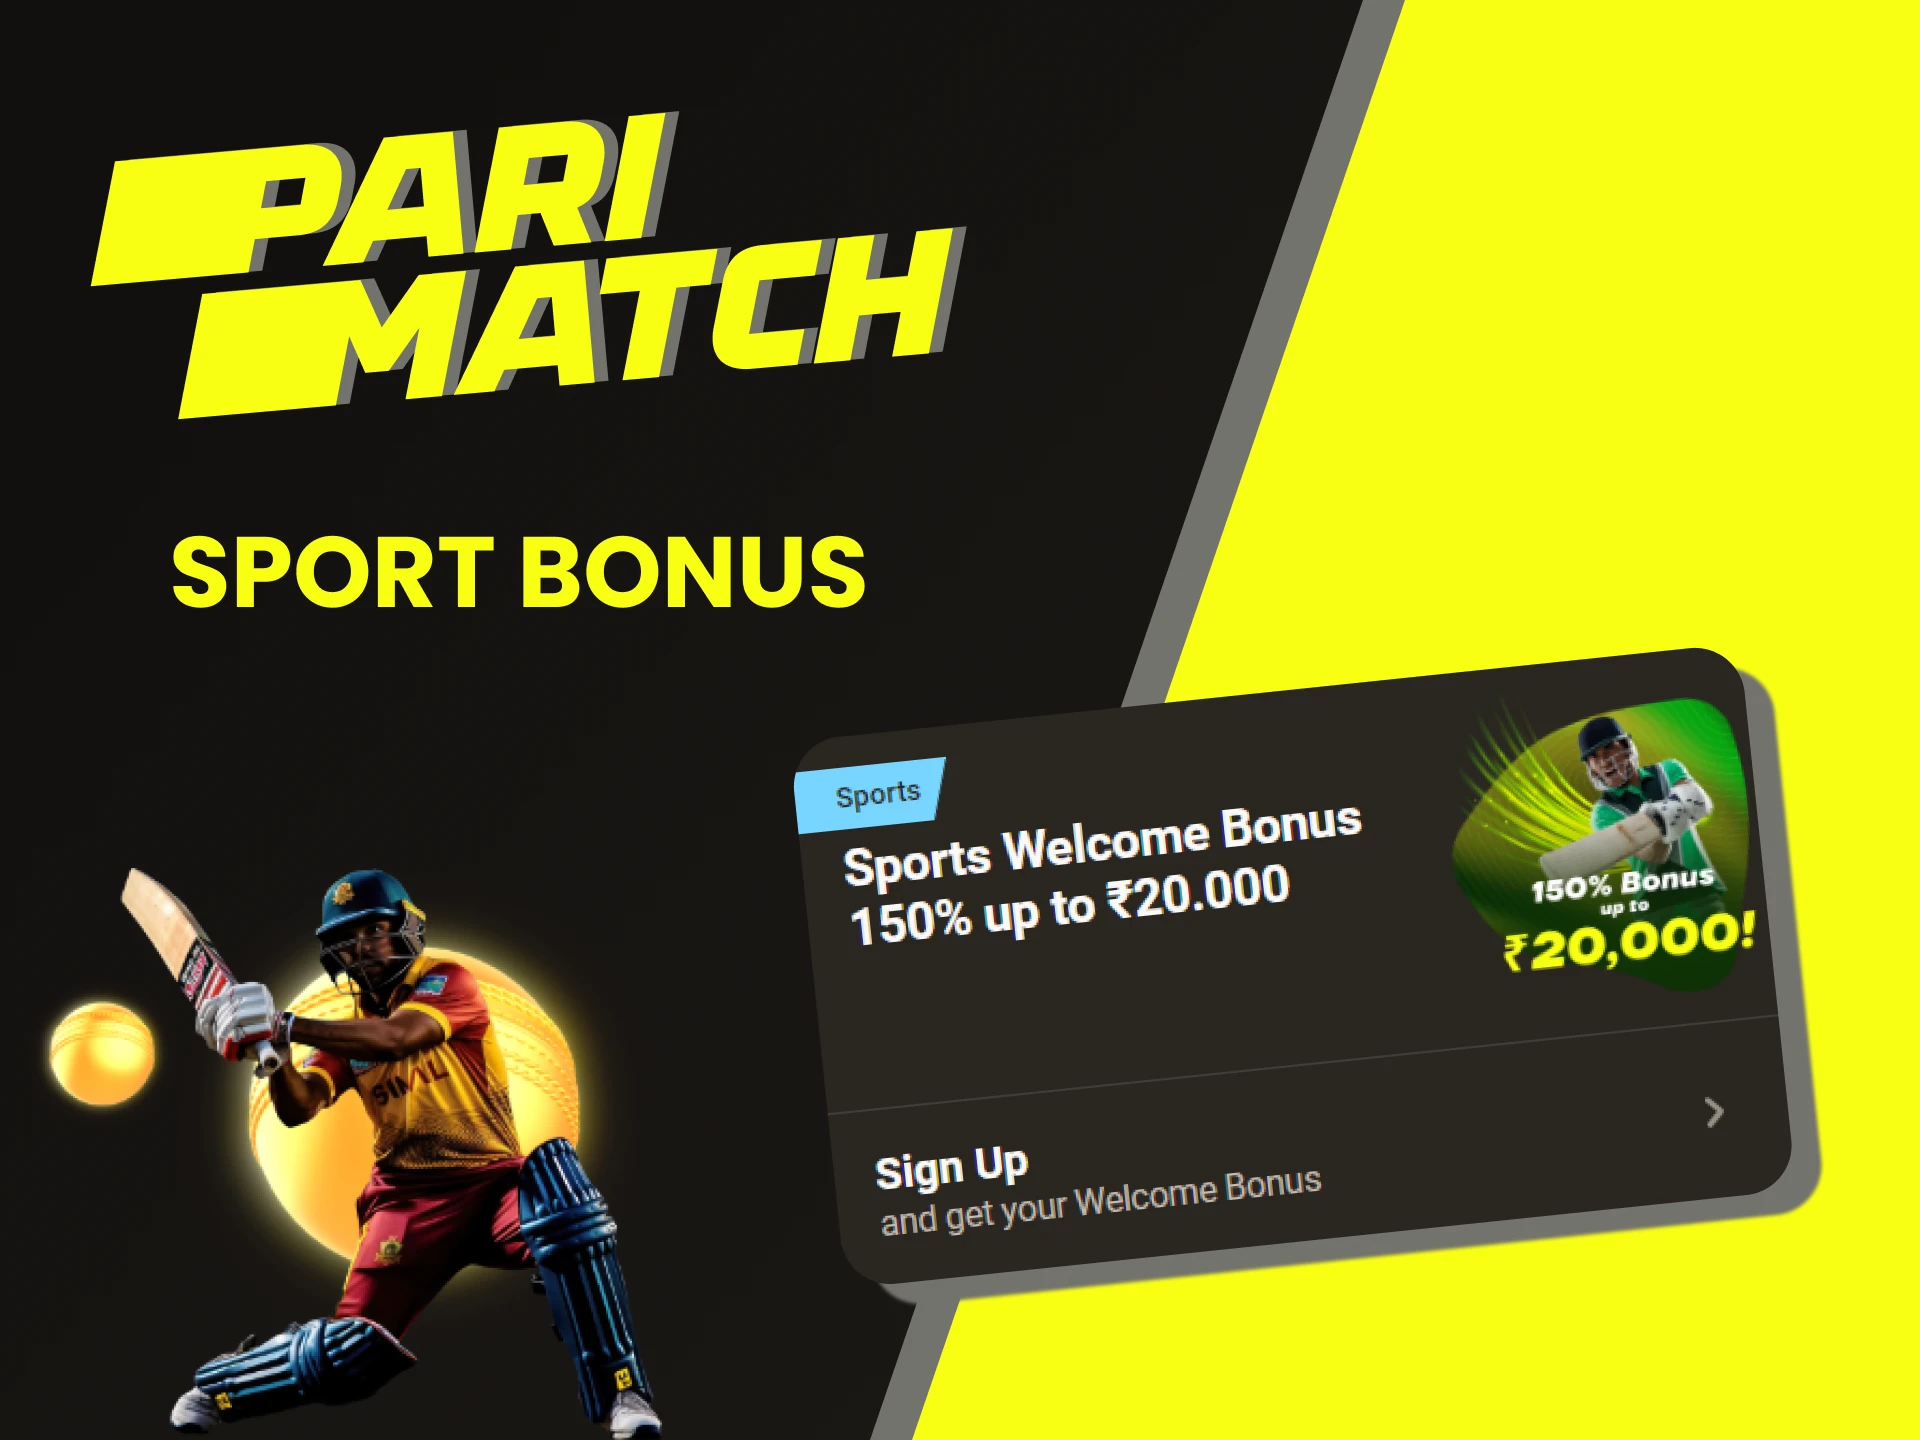 Parimatch offers a welcome bonus for sports.